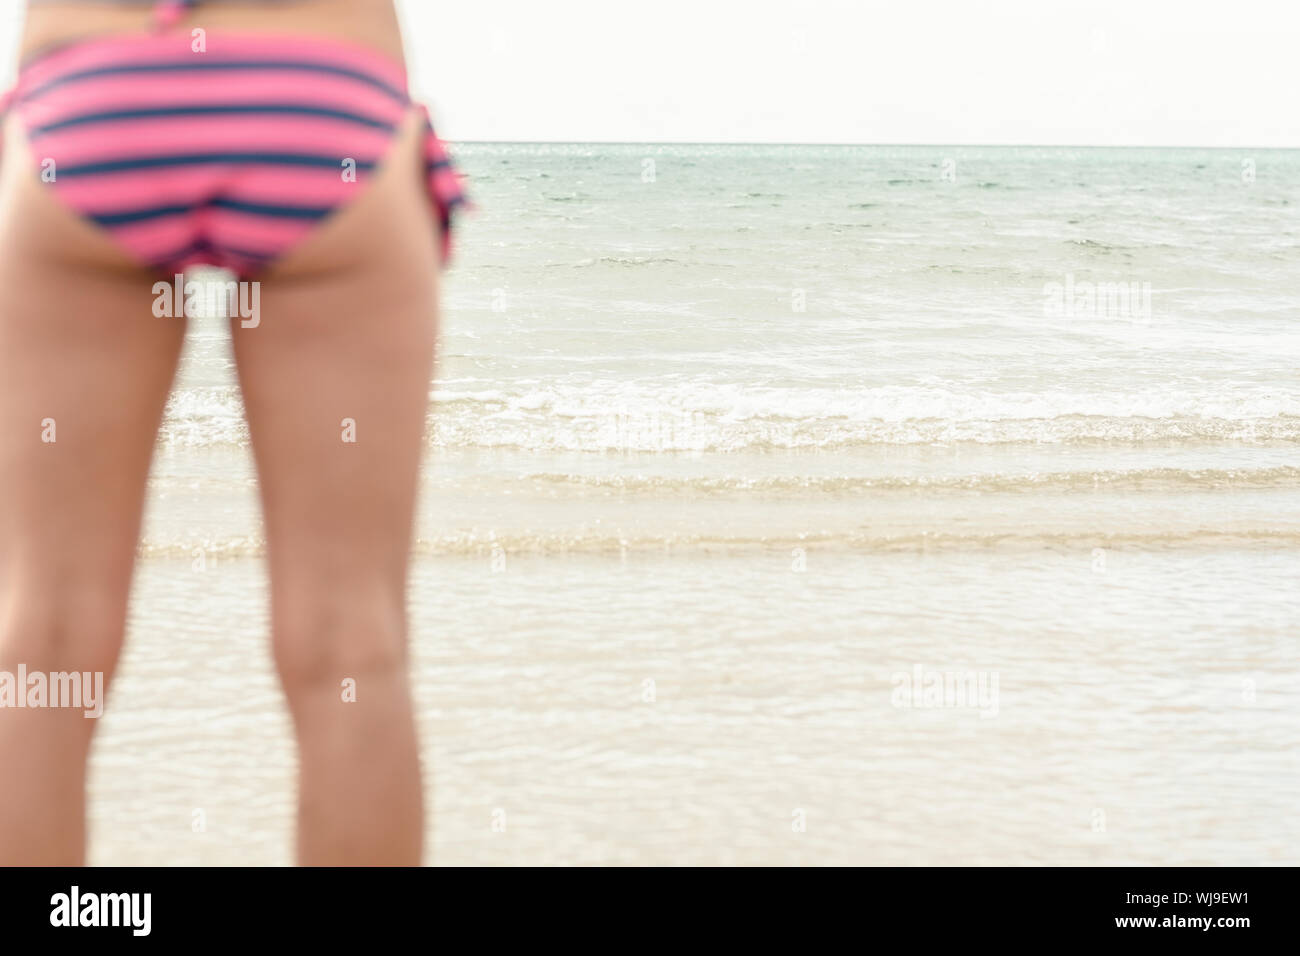 Rear view mid section of a slender woman in striped bikini bottom standing  on beach Stock Photo - Alamy